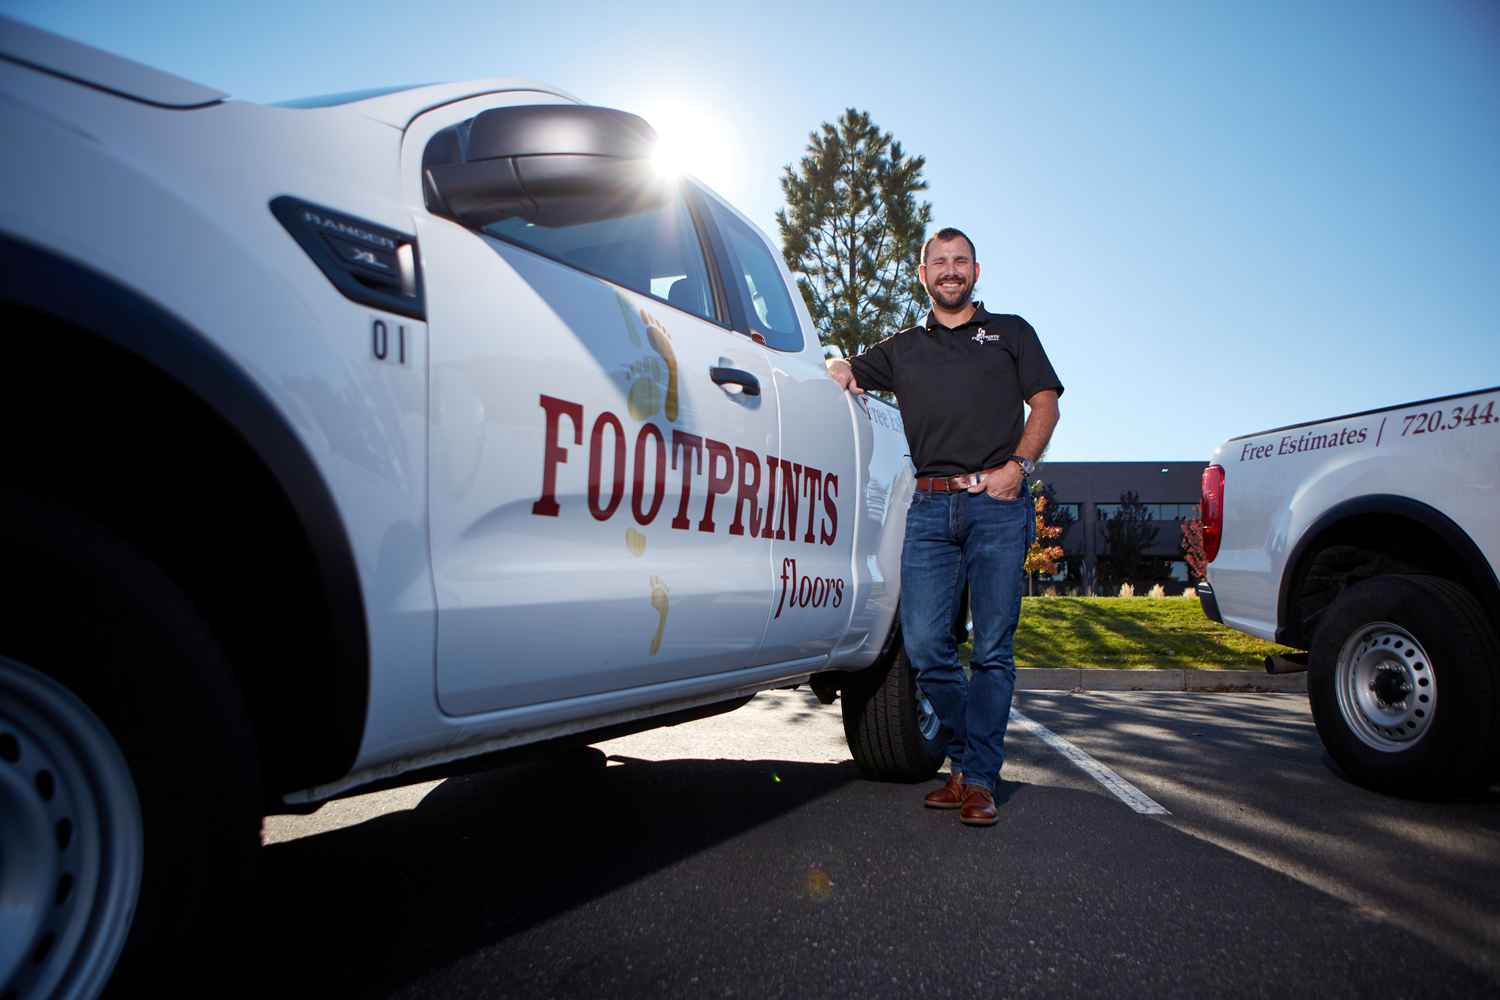 Footprints Floors is ready to help you with any of your flooring needs in Denver.